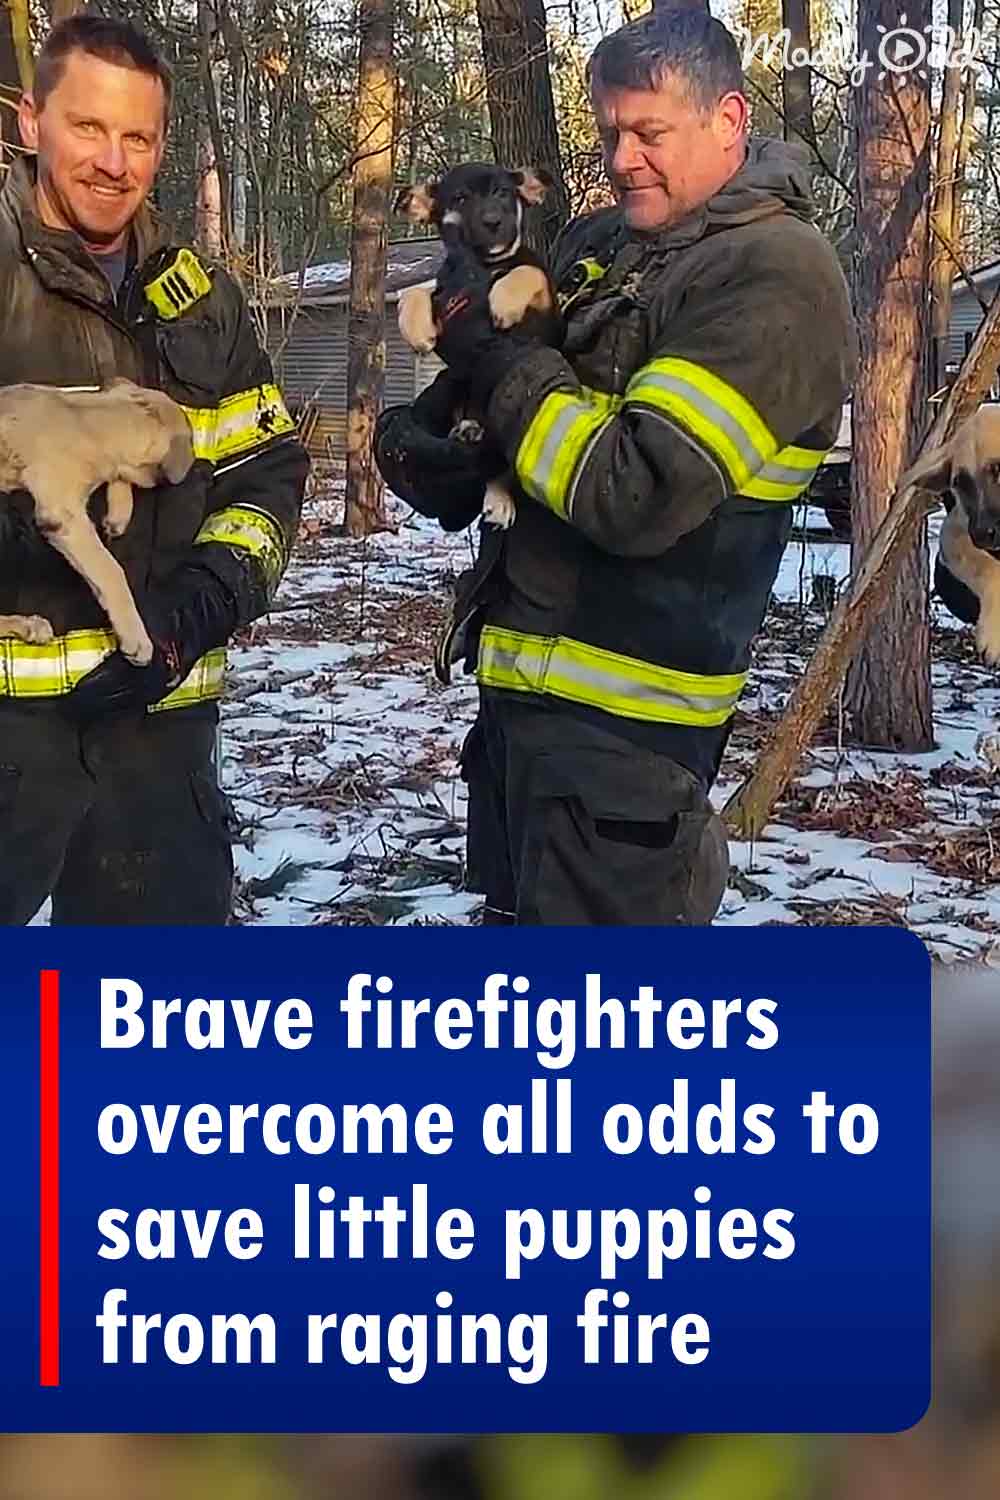 Brave firefighters overcome all odds to save little puppies from raging fire